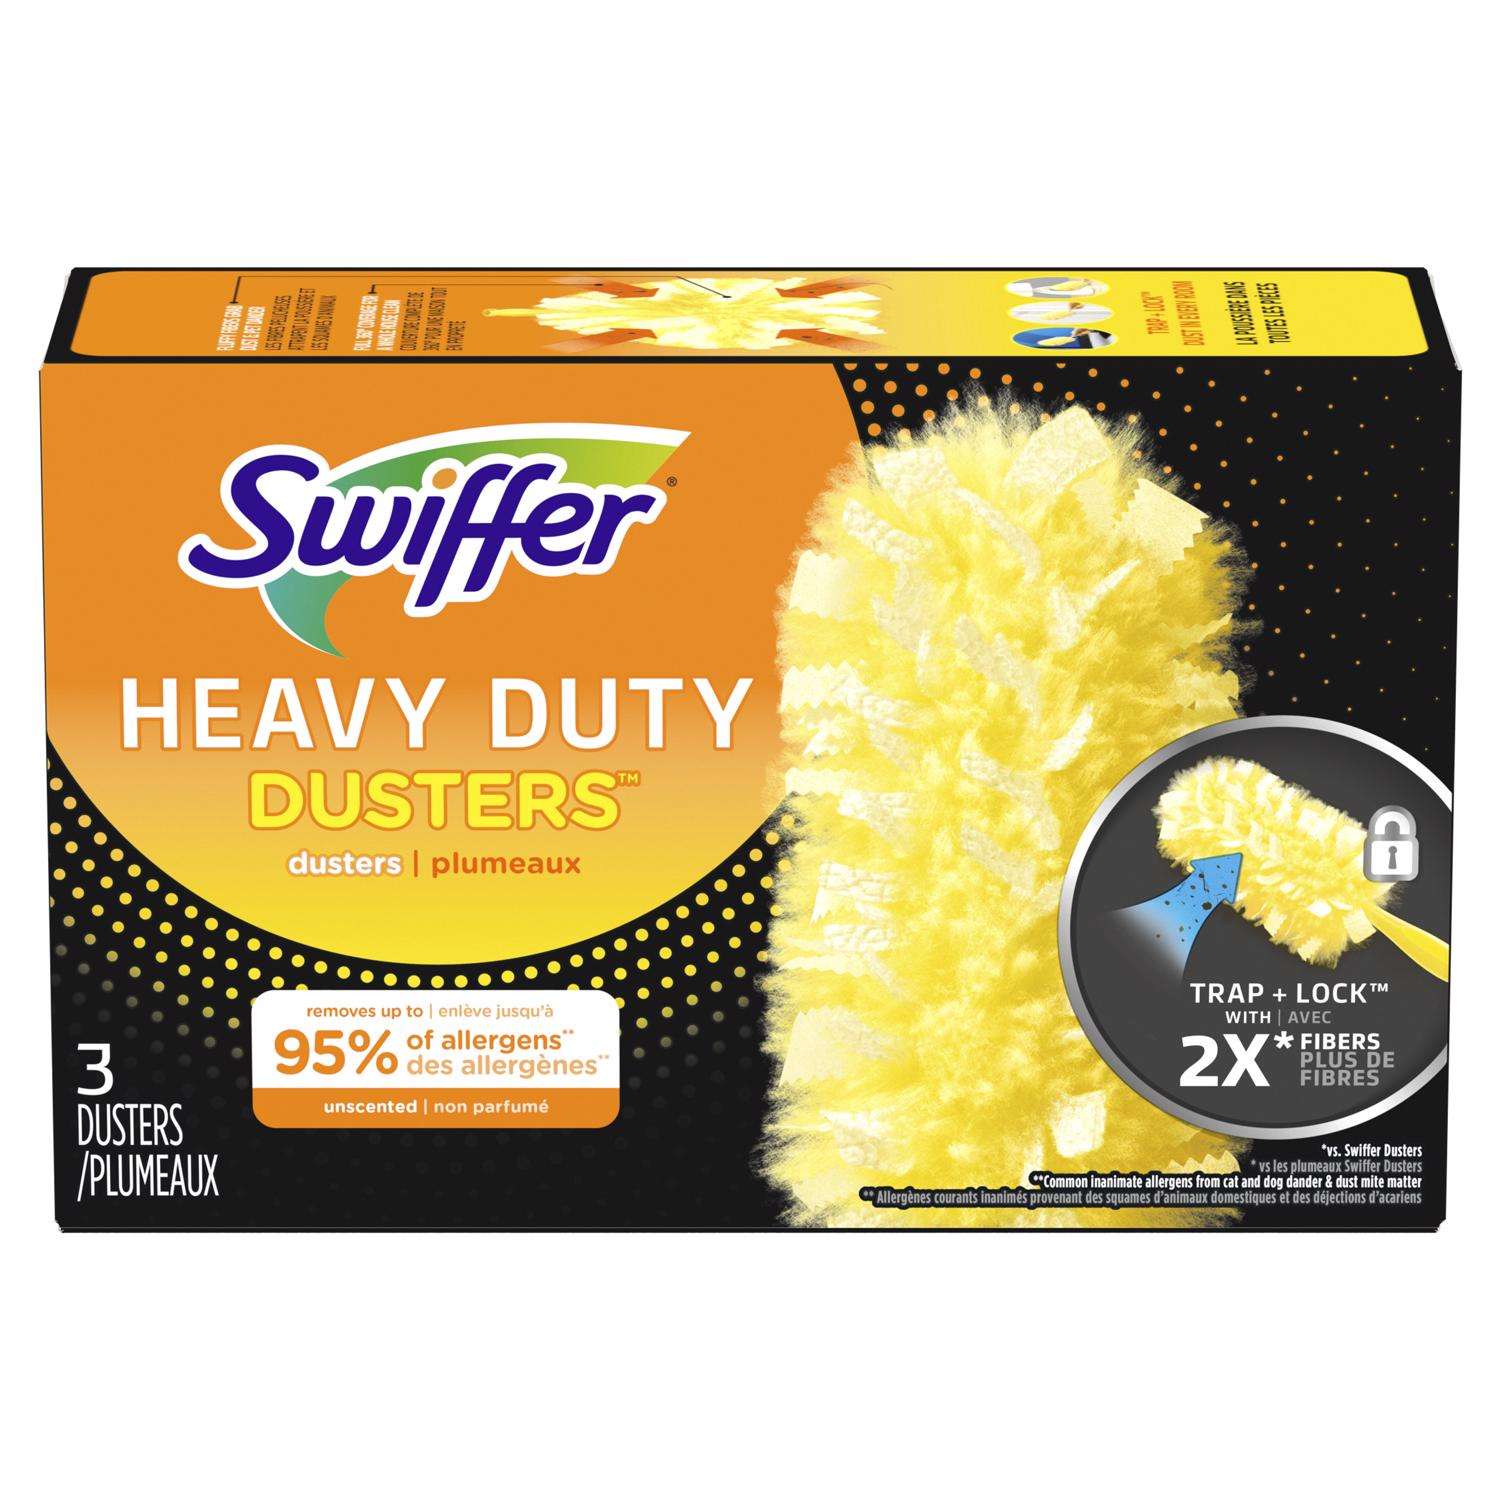  Swiffer Duster Refill + 1 Handle (28 Count) : Health